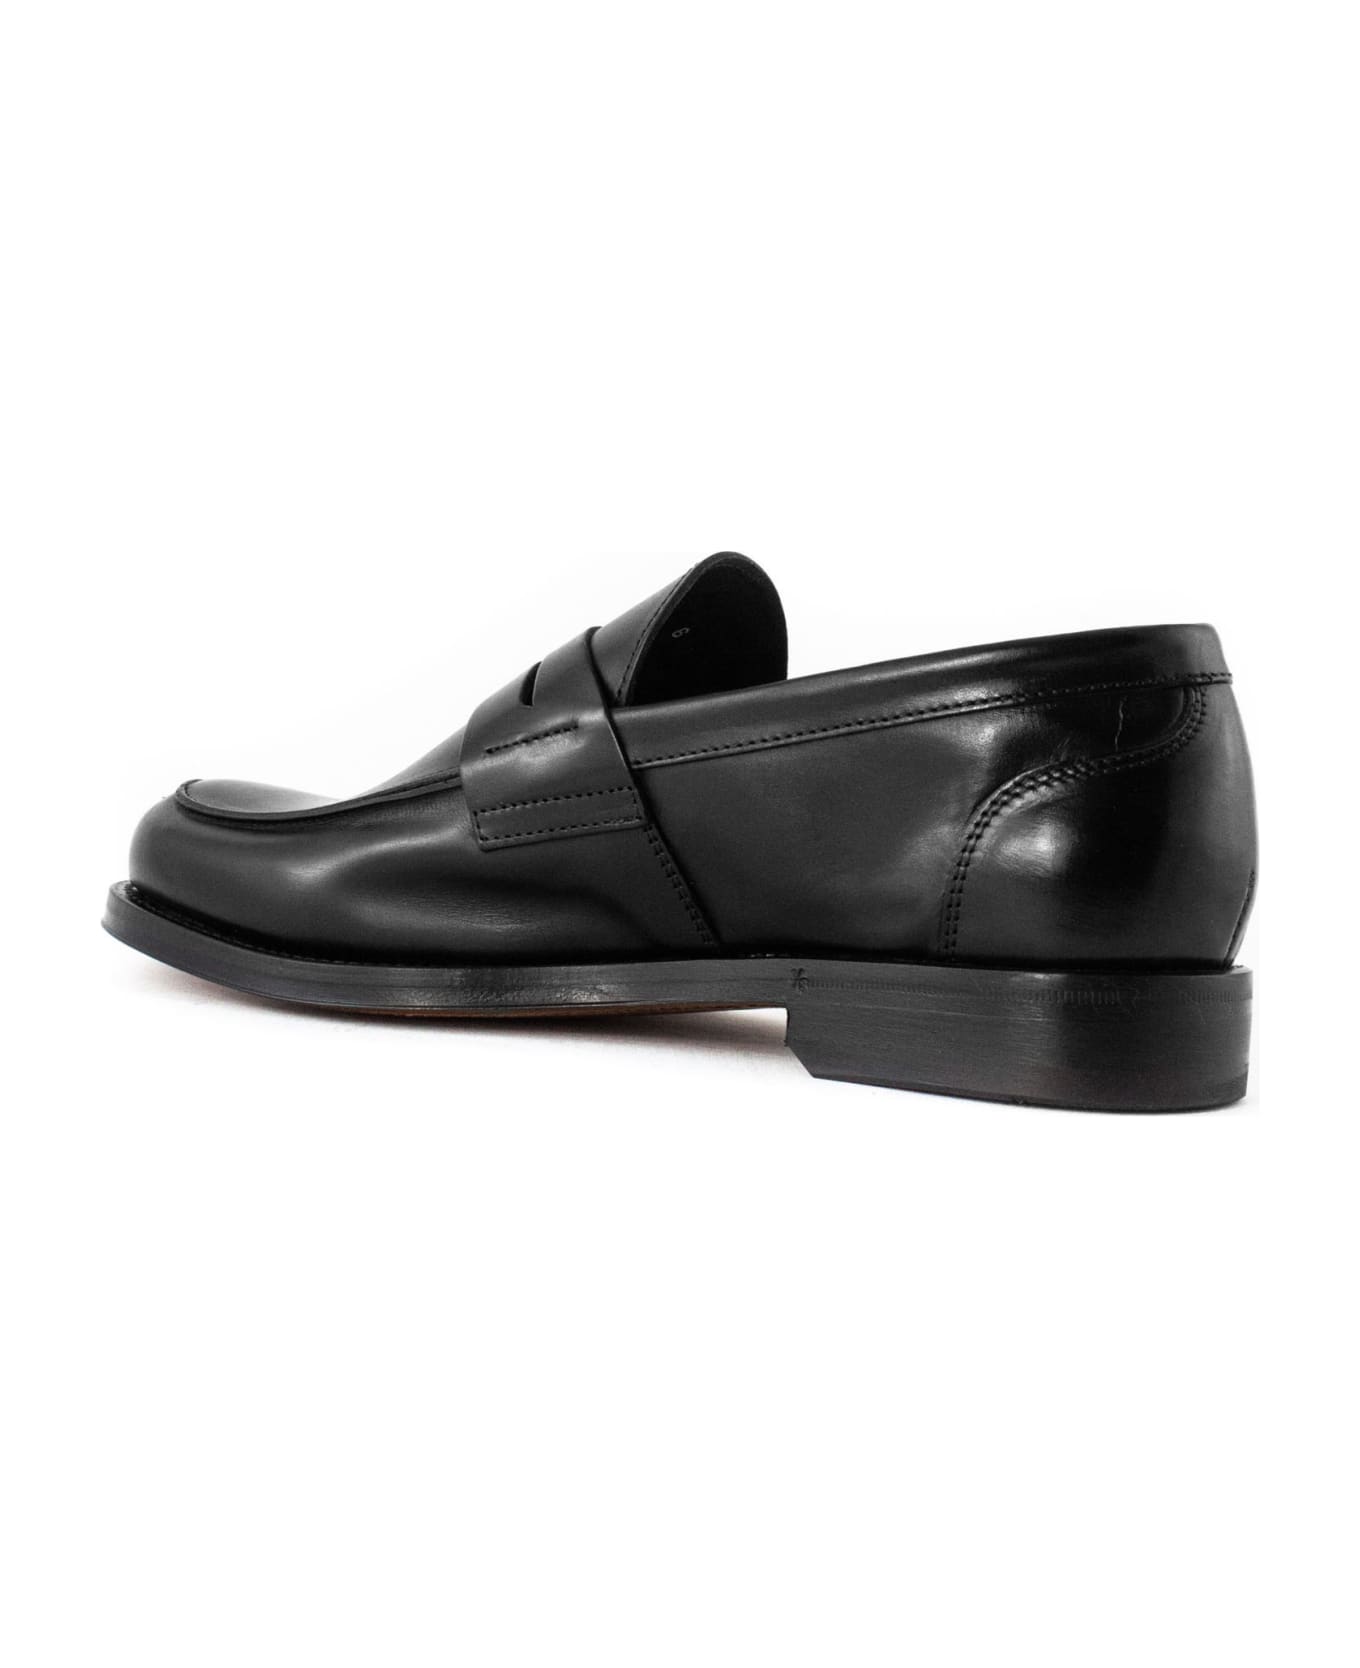 Green George Black Leather Loafer - Black ローファー＆デッキシューズ